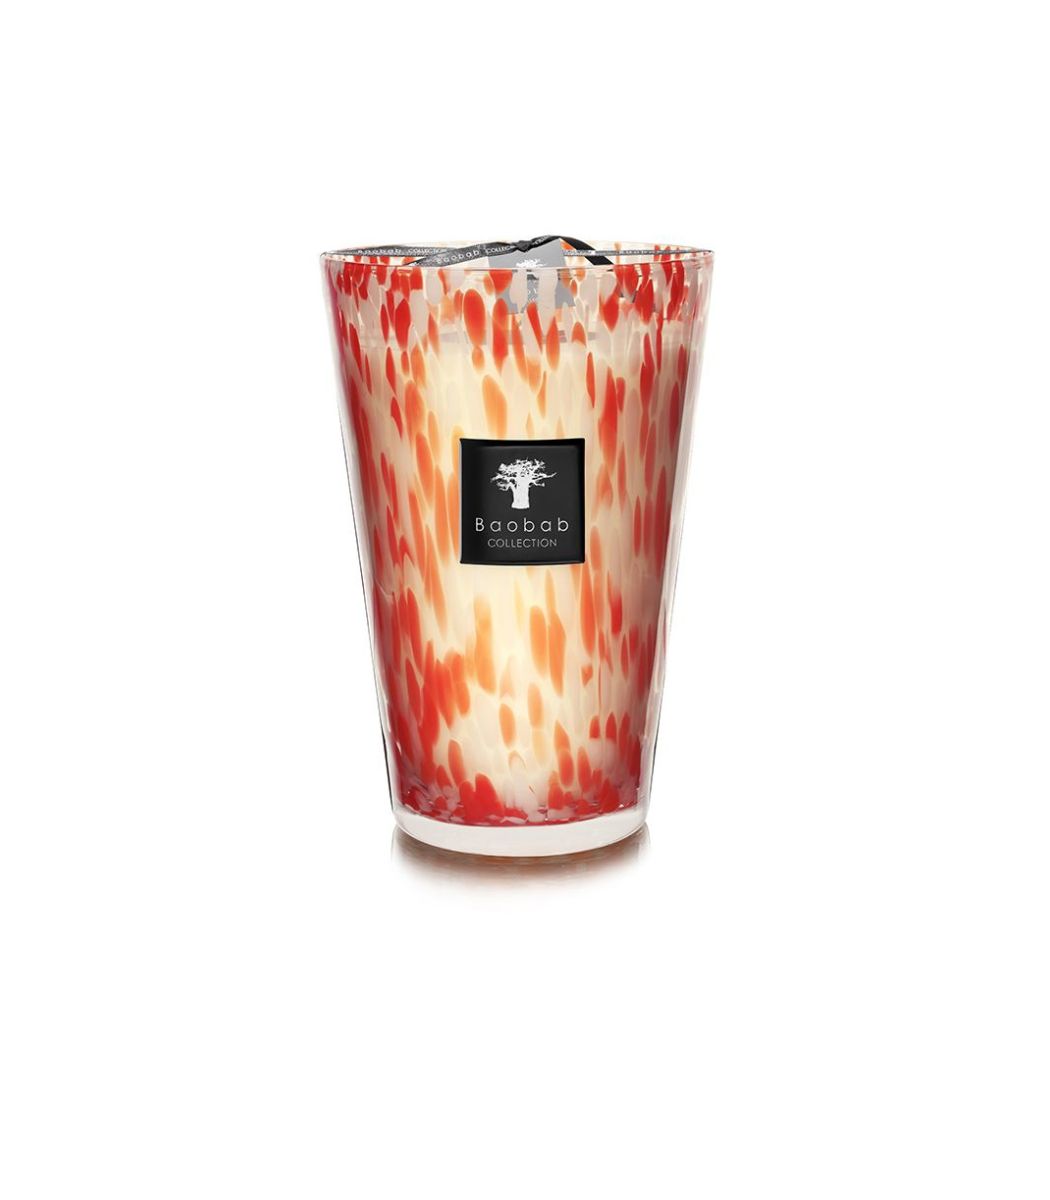 CANDLE PEARLS CORAL